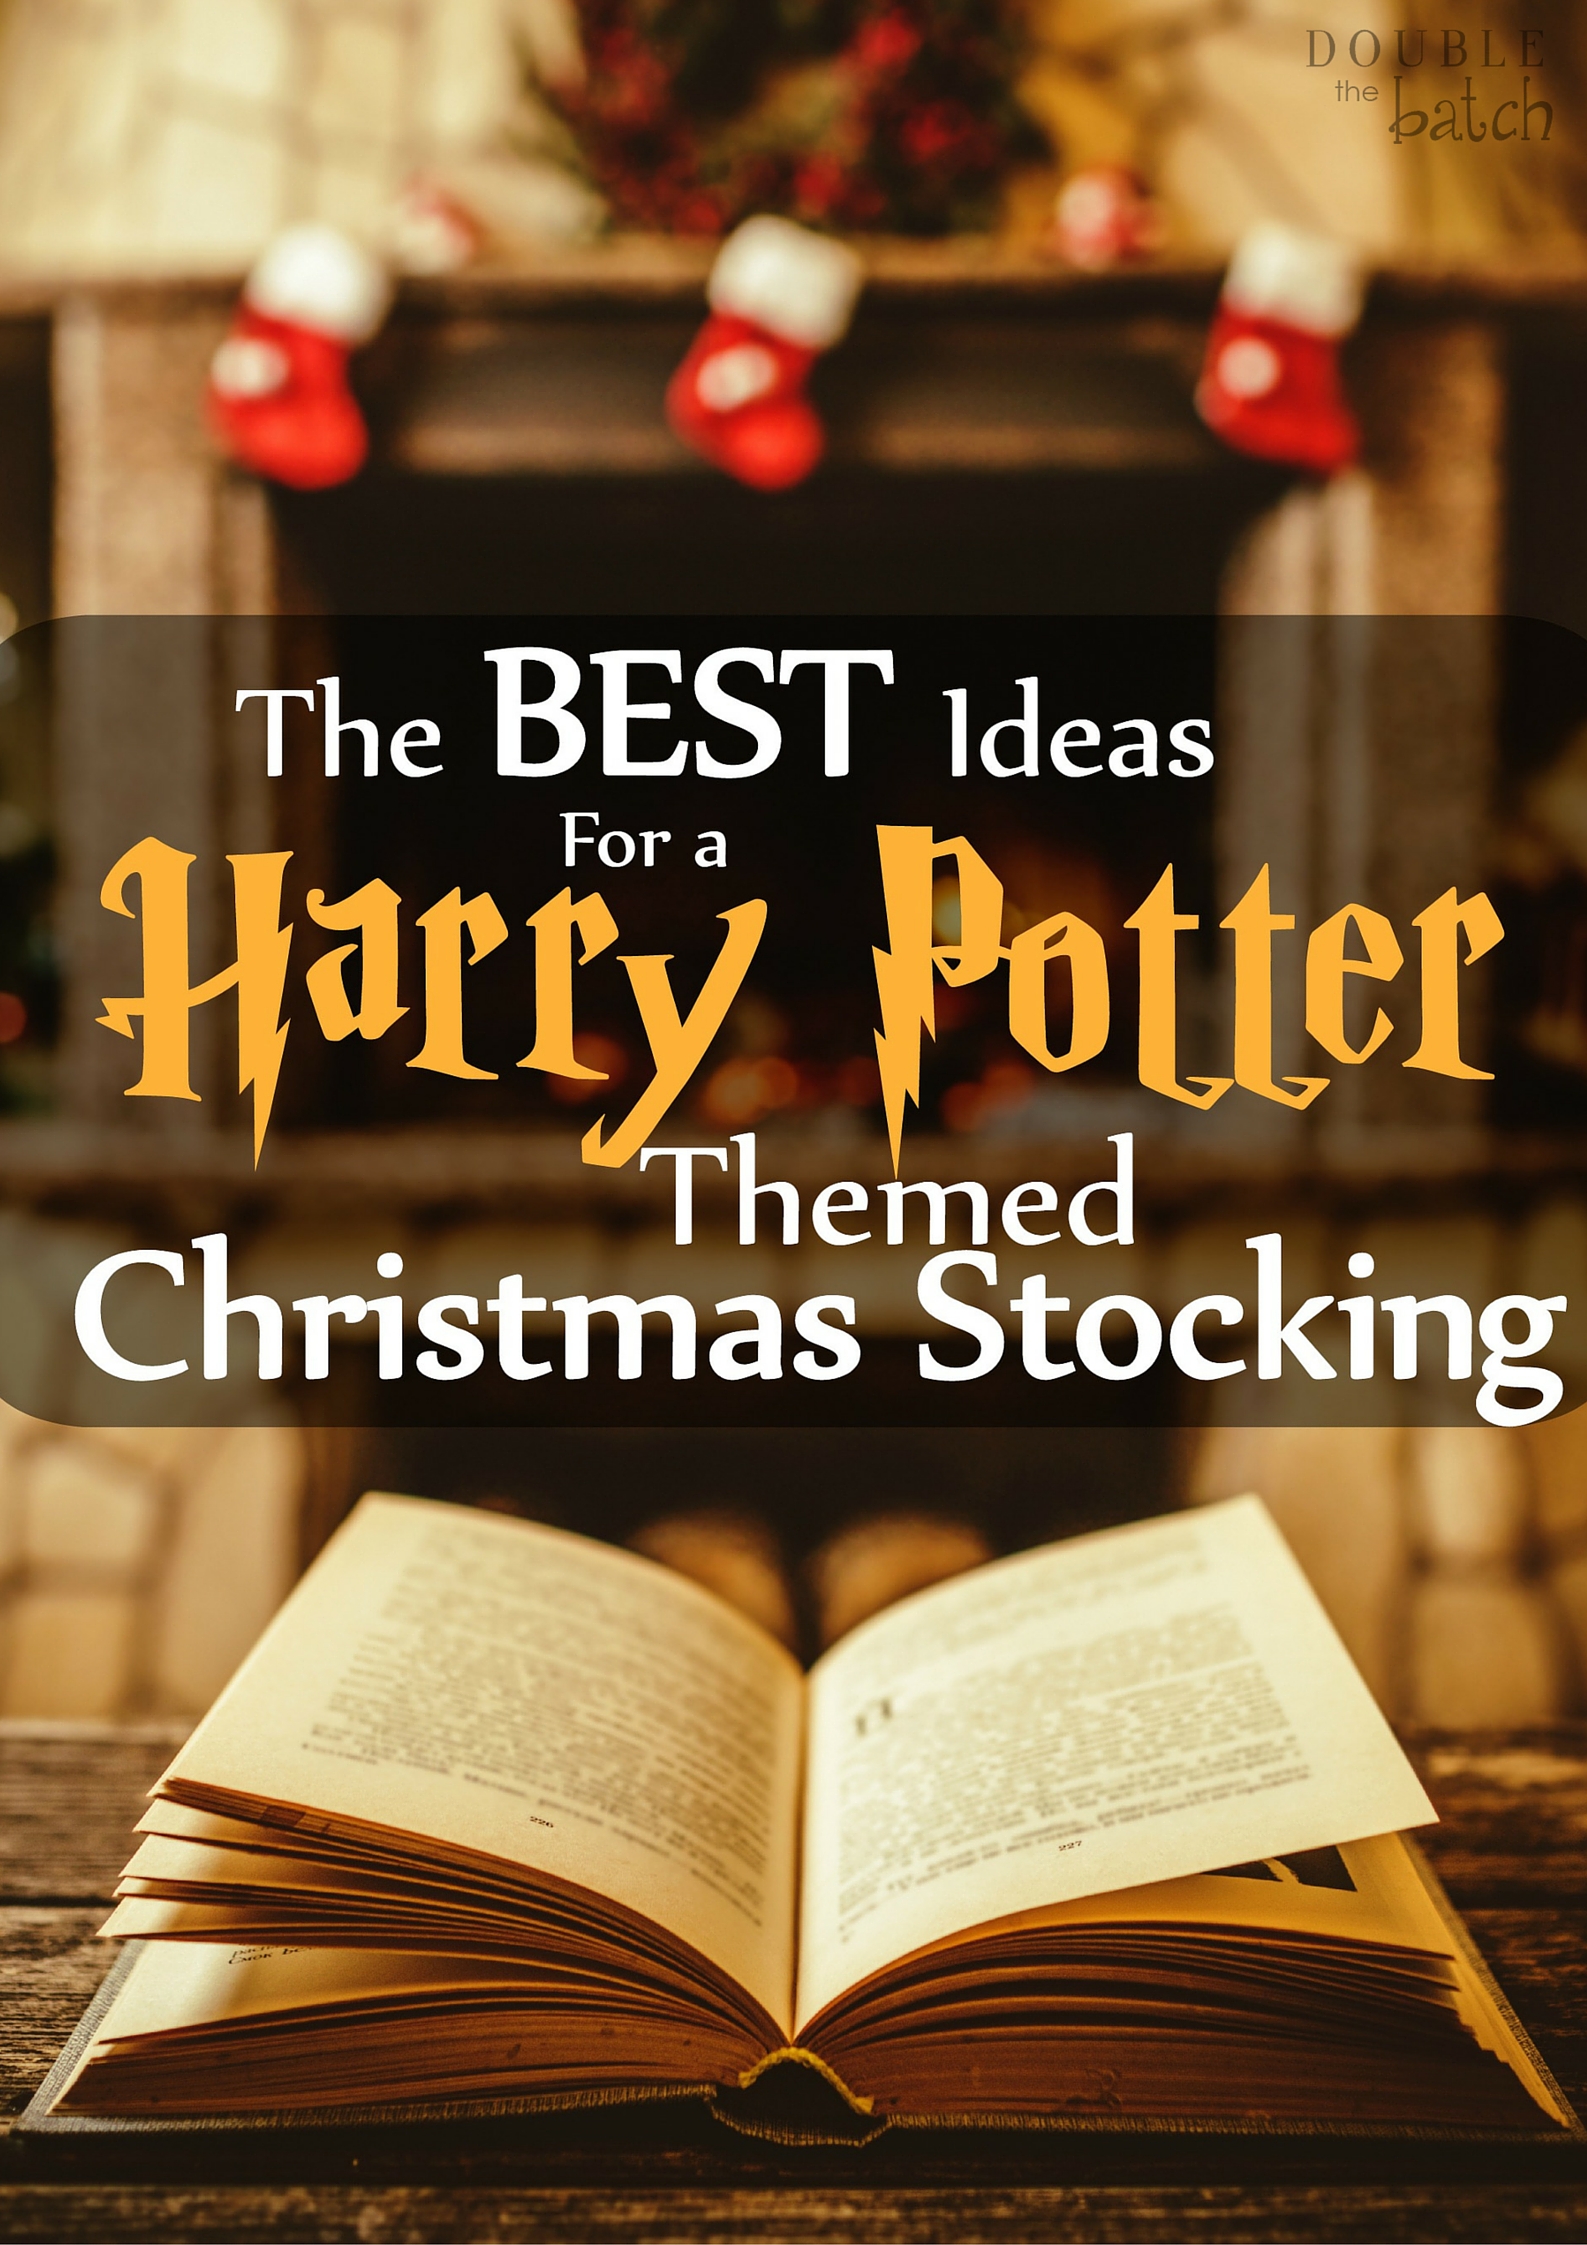 If you live with or have a close friend who is a harry potter fanatic then they will LOVE this Harry Potter Themed Christmas Stocking!